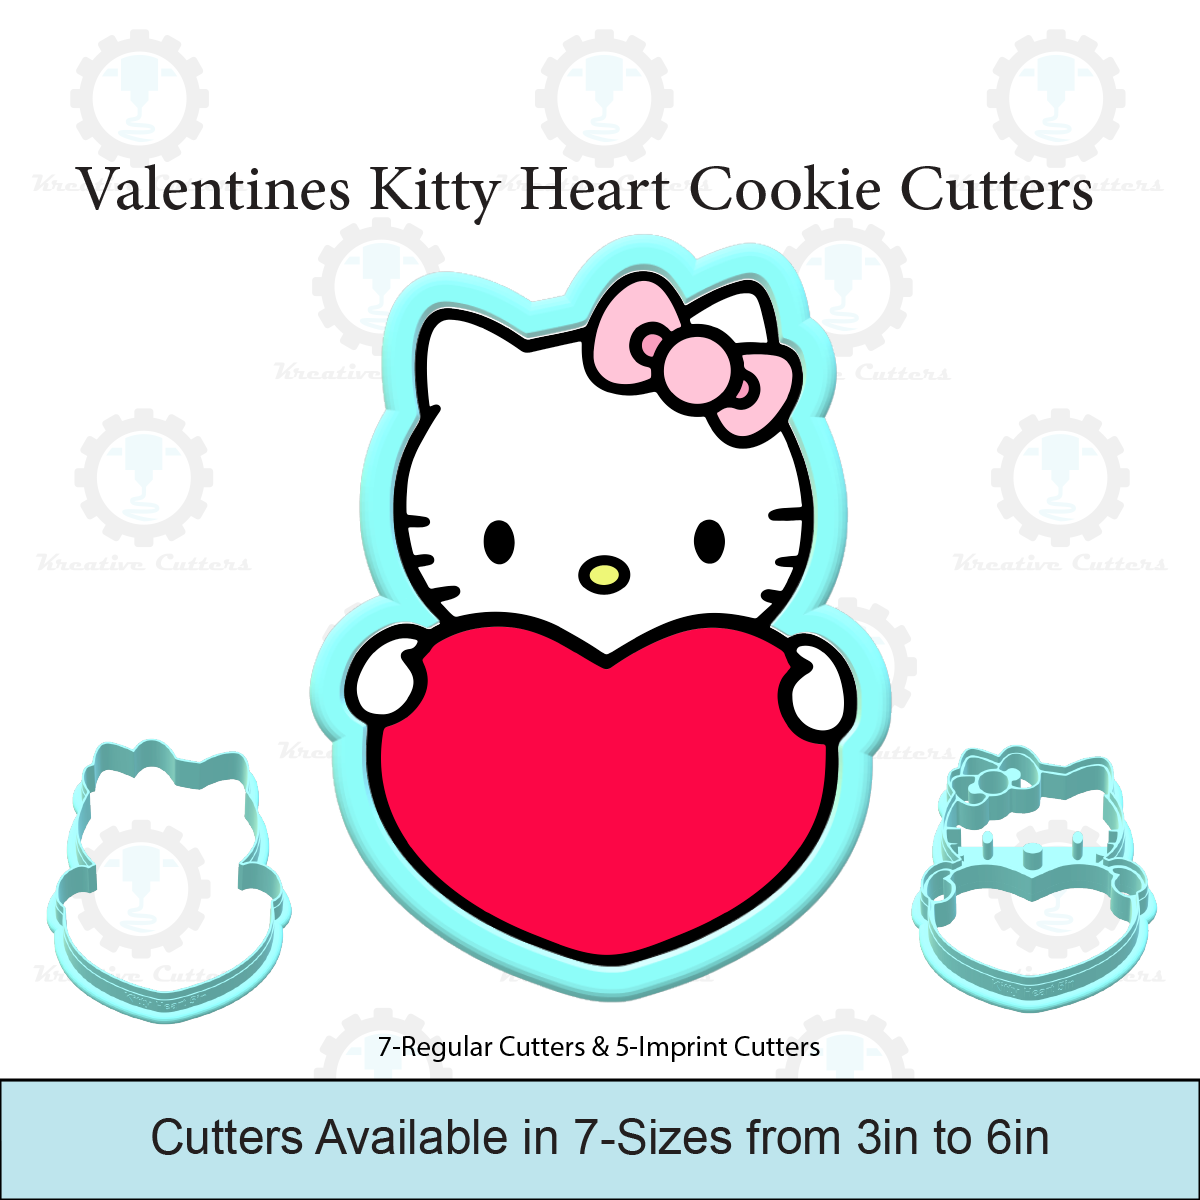 Valentines Heart Kitty Cookie Cutters